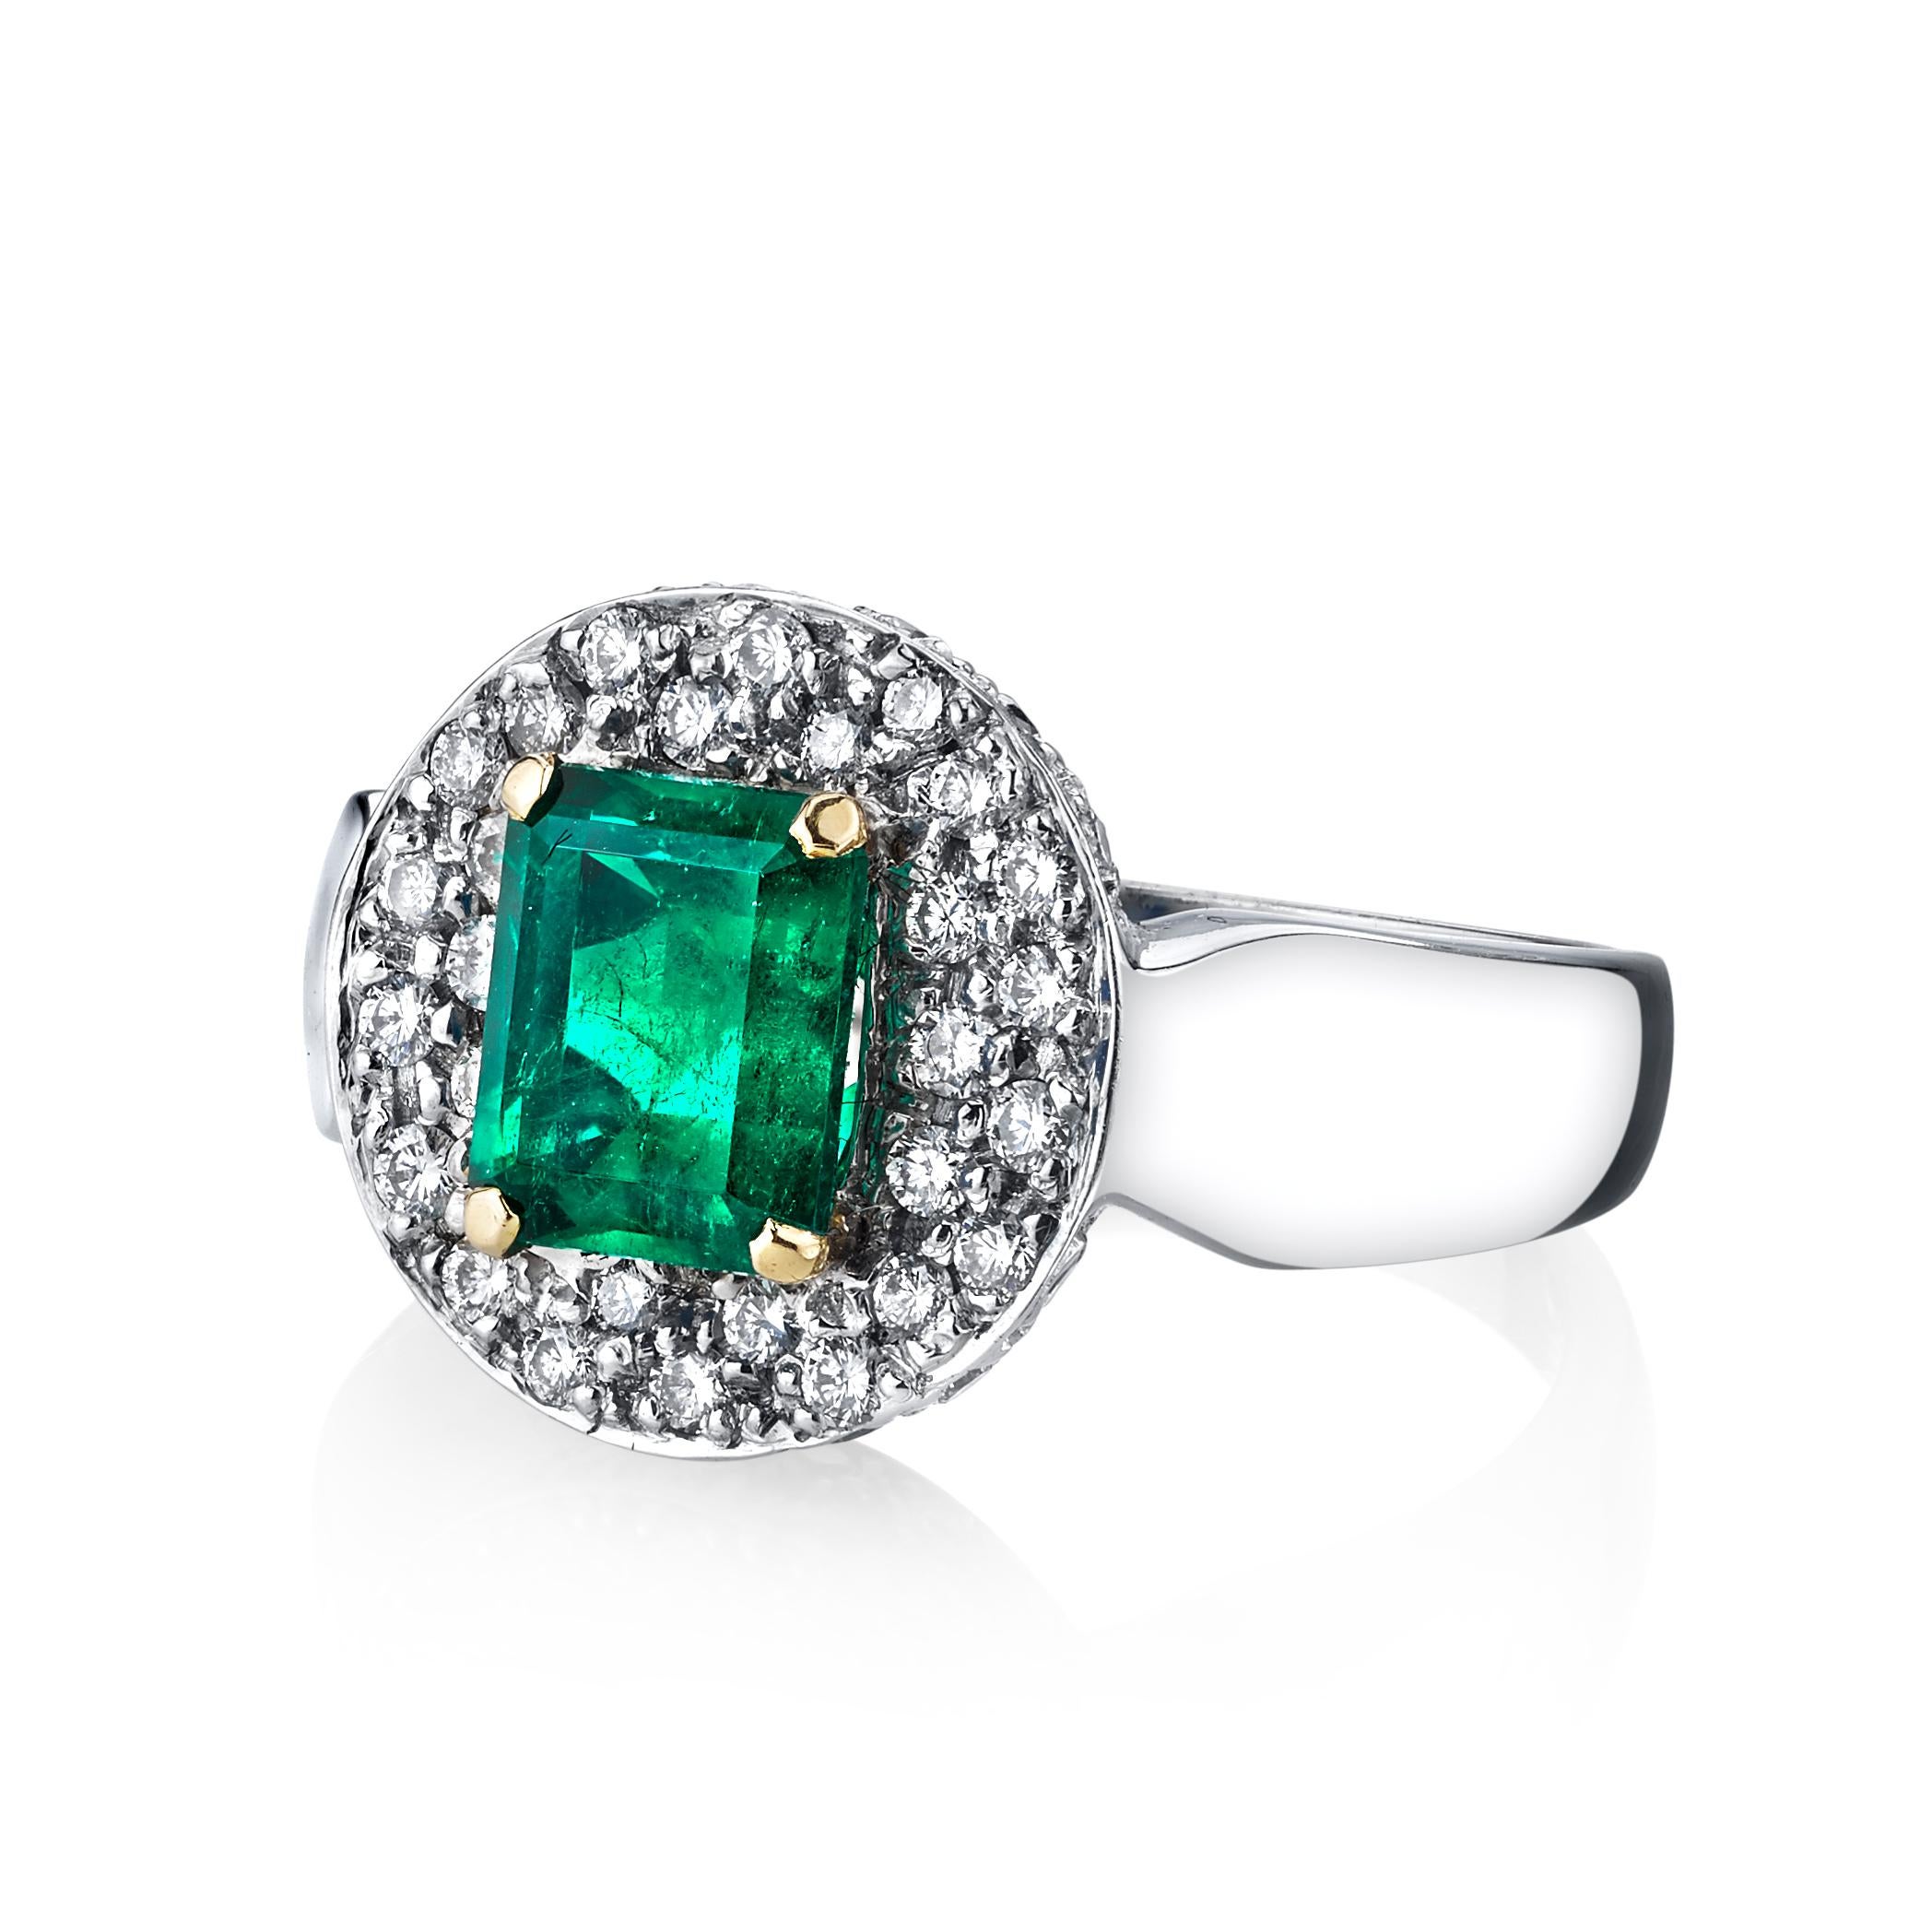 Emerald Cut Emerald and Diamond Cocktail Ring in White Gold, 2.05 Carats For Sale